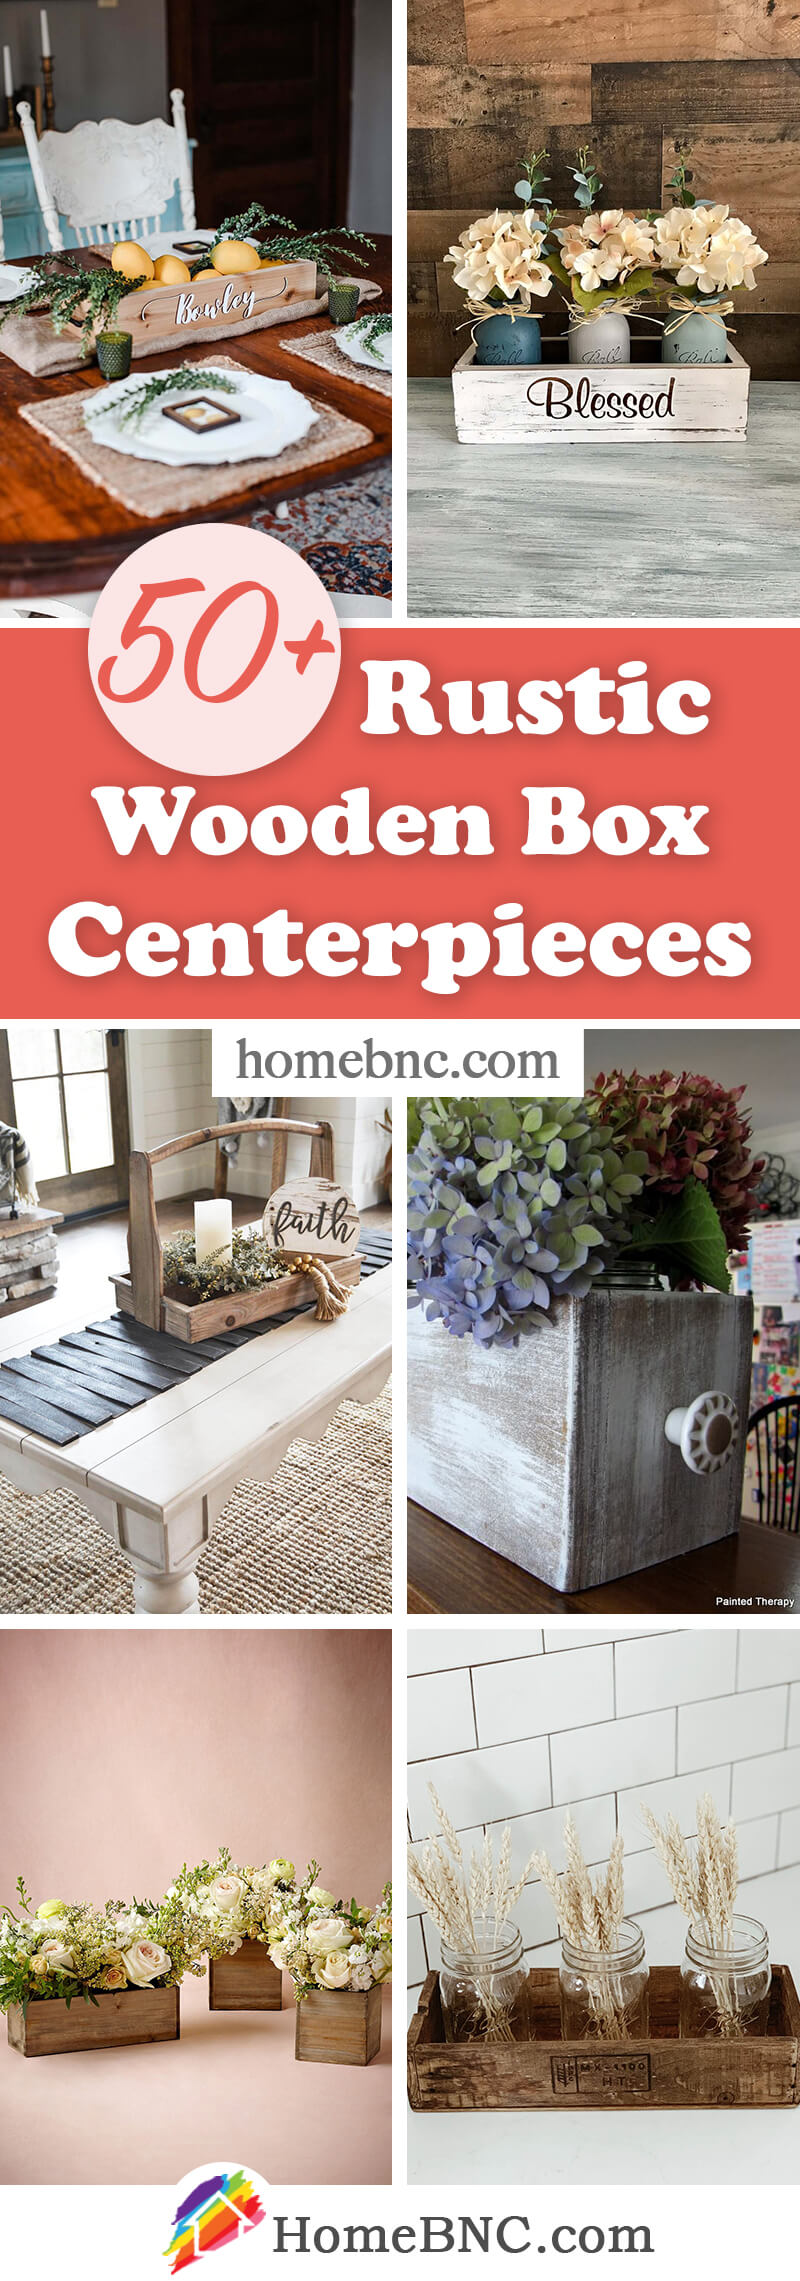 Rustic Wooden Box Centerpieces